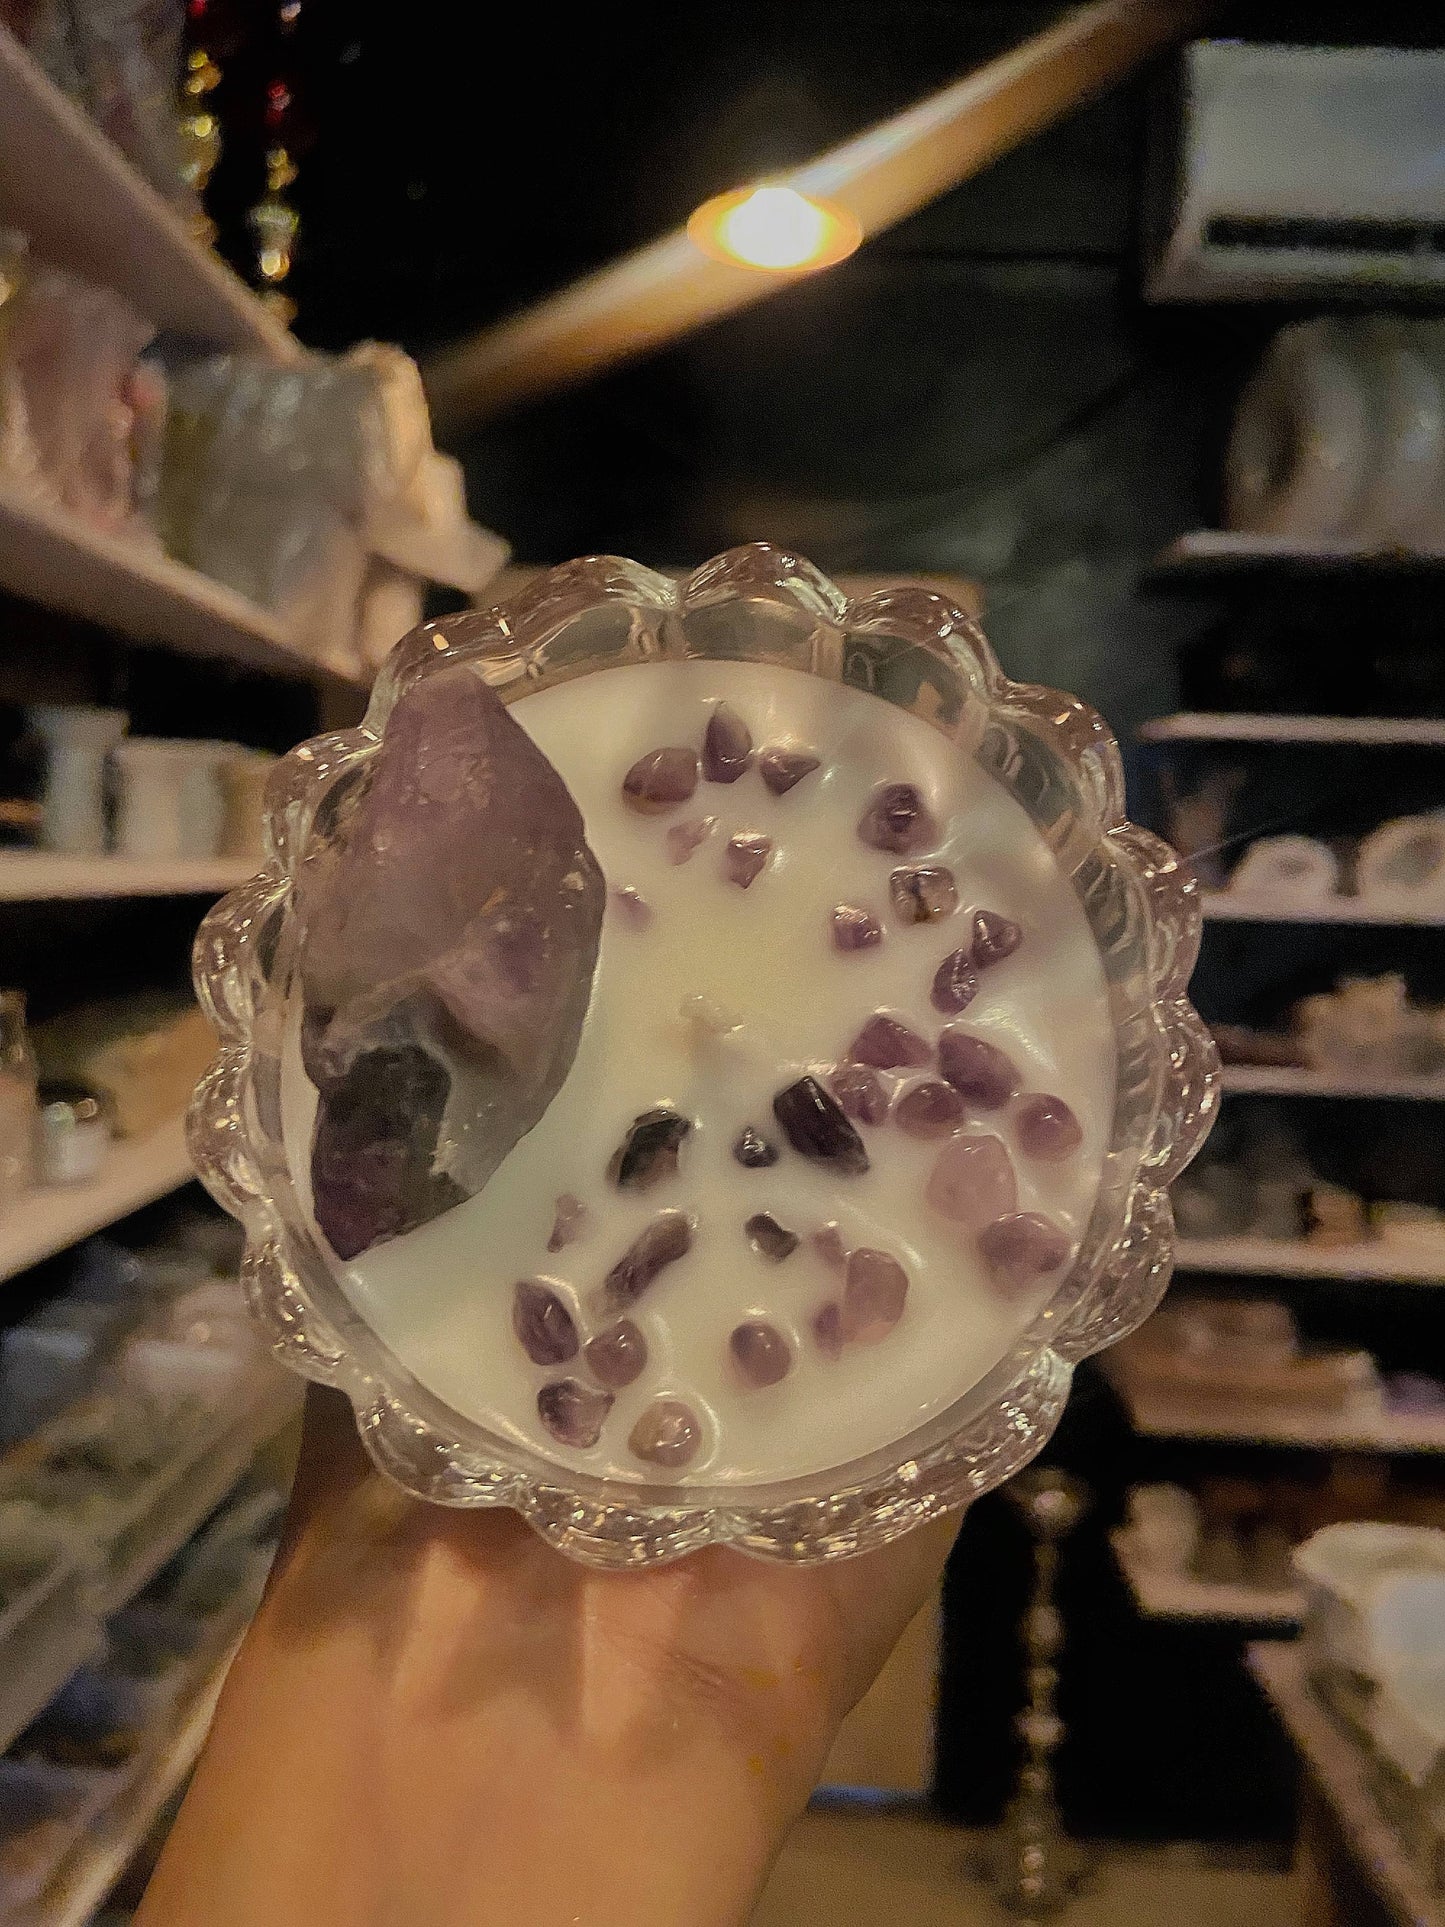 Amethyst Candle Candles